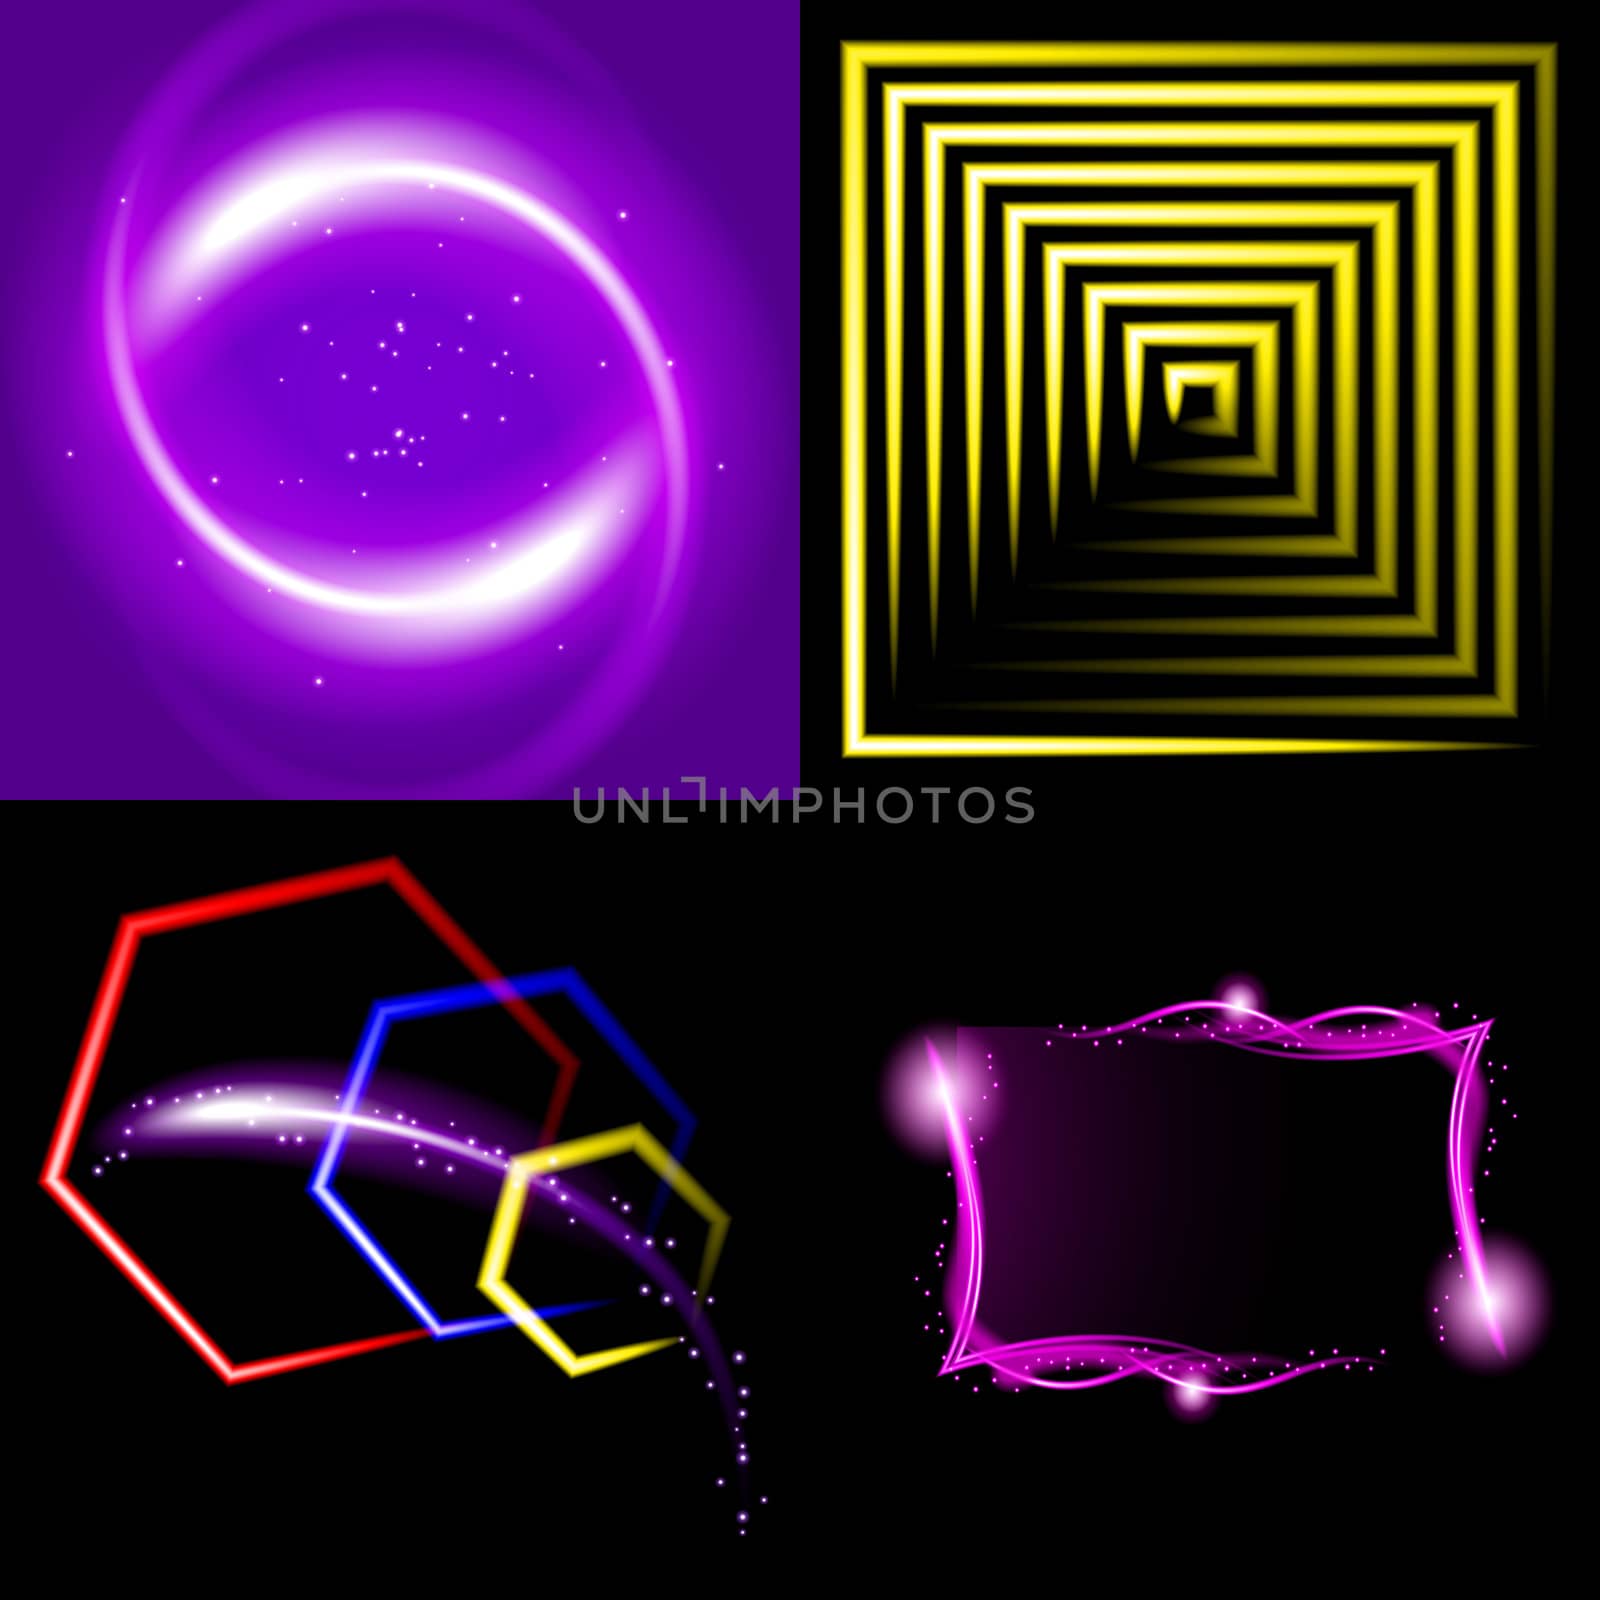 Set  of colorful  abstract background with blurred magic neon light curved lines.  illustration